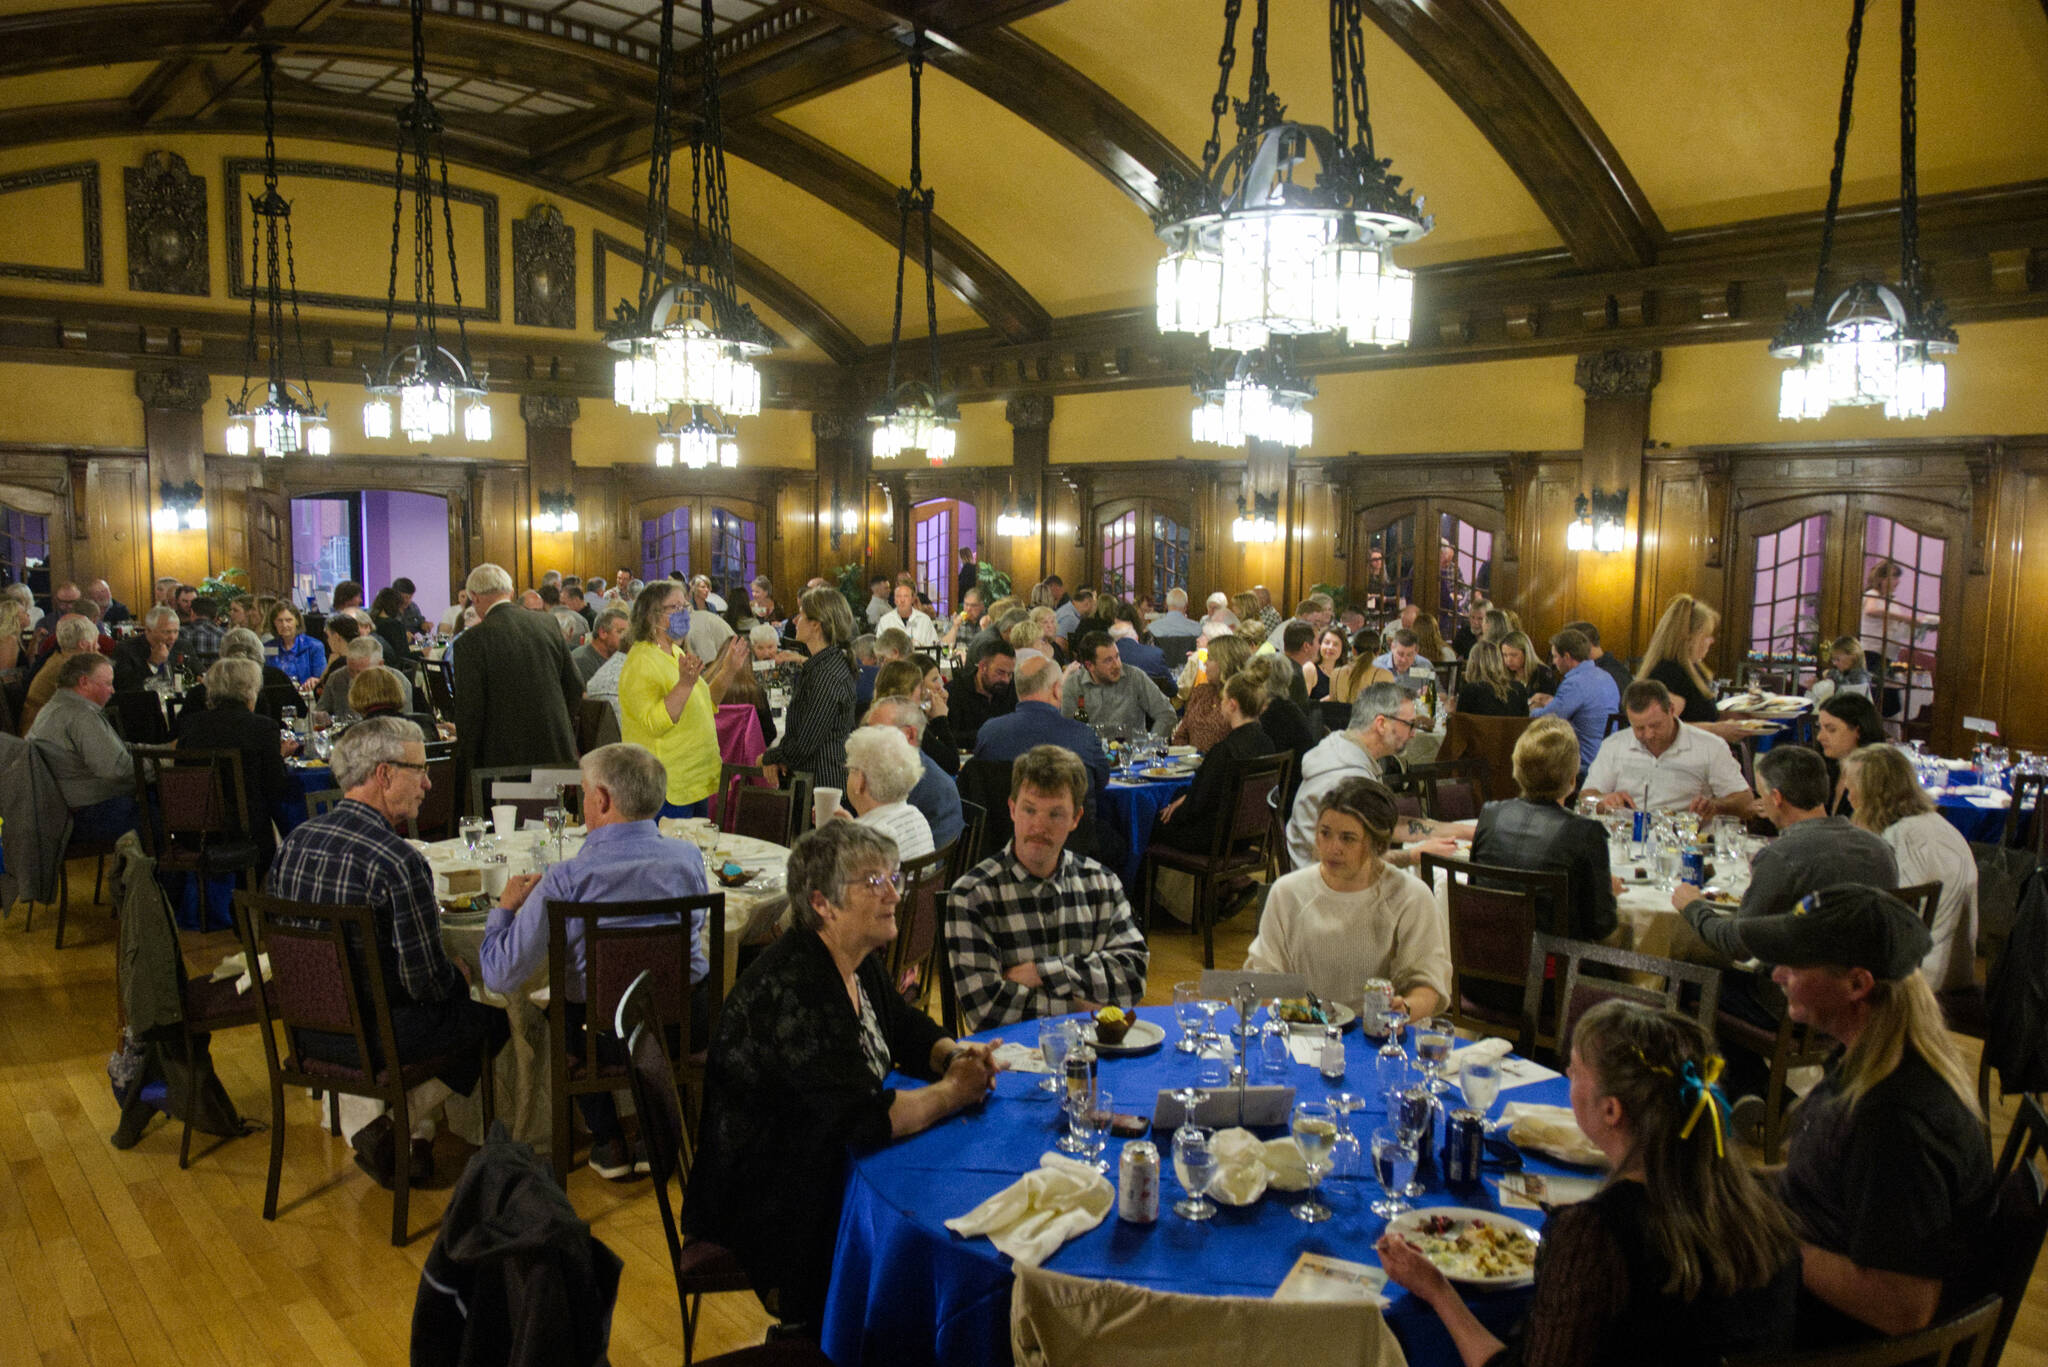 A memorial fundraiser honouring the Sandor and Romich families was held on Wednesday, June 8, at the Royal Alexandra Hall in support of the Shelter for Ukrainians Society. Trevor Crawley photo.